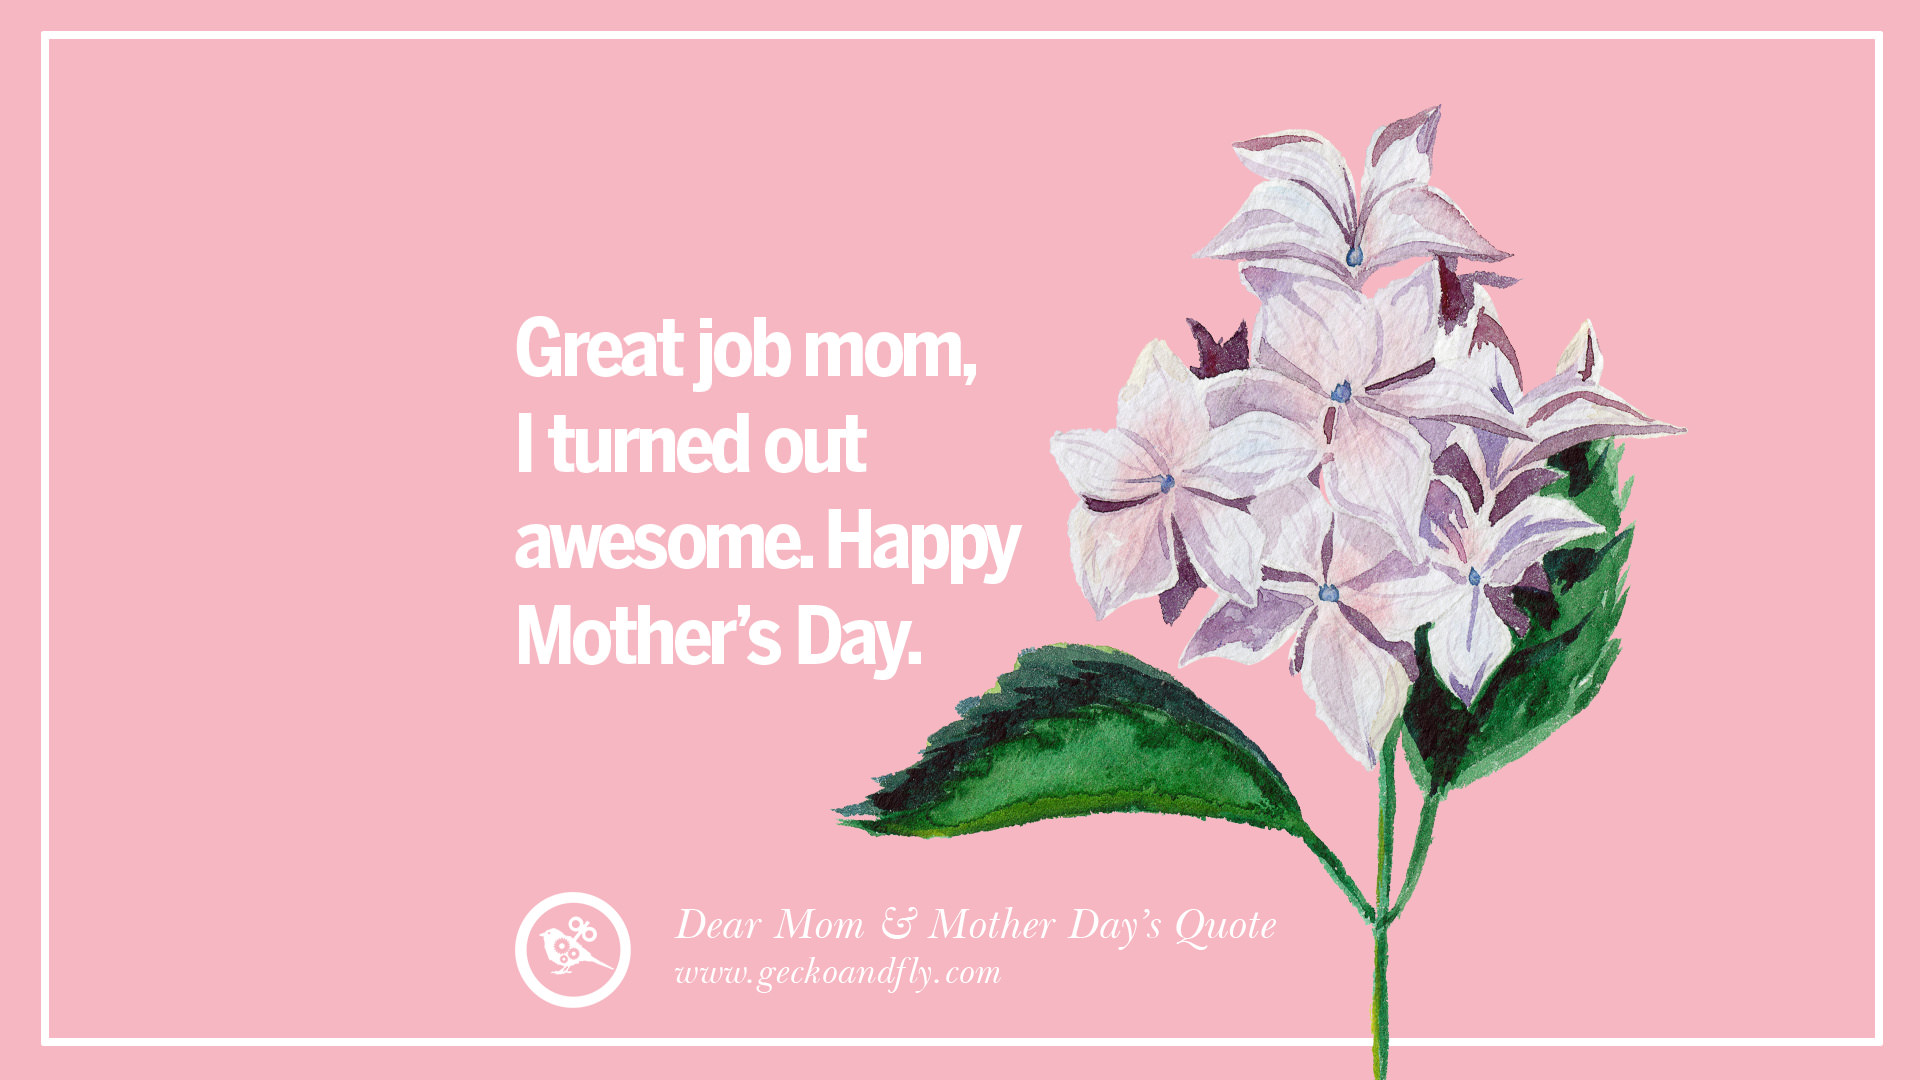 Happy Mothers Day Images Quotes Choose the perfect words to wish the